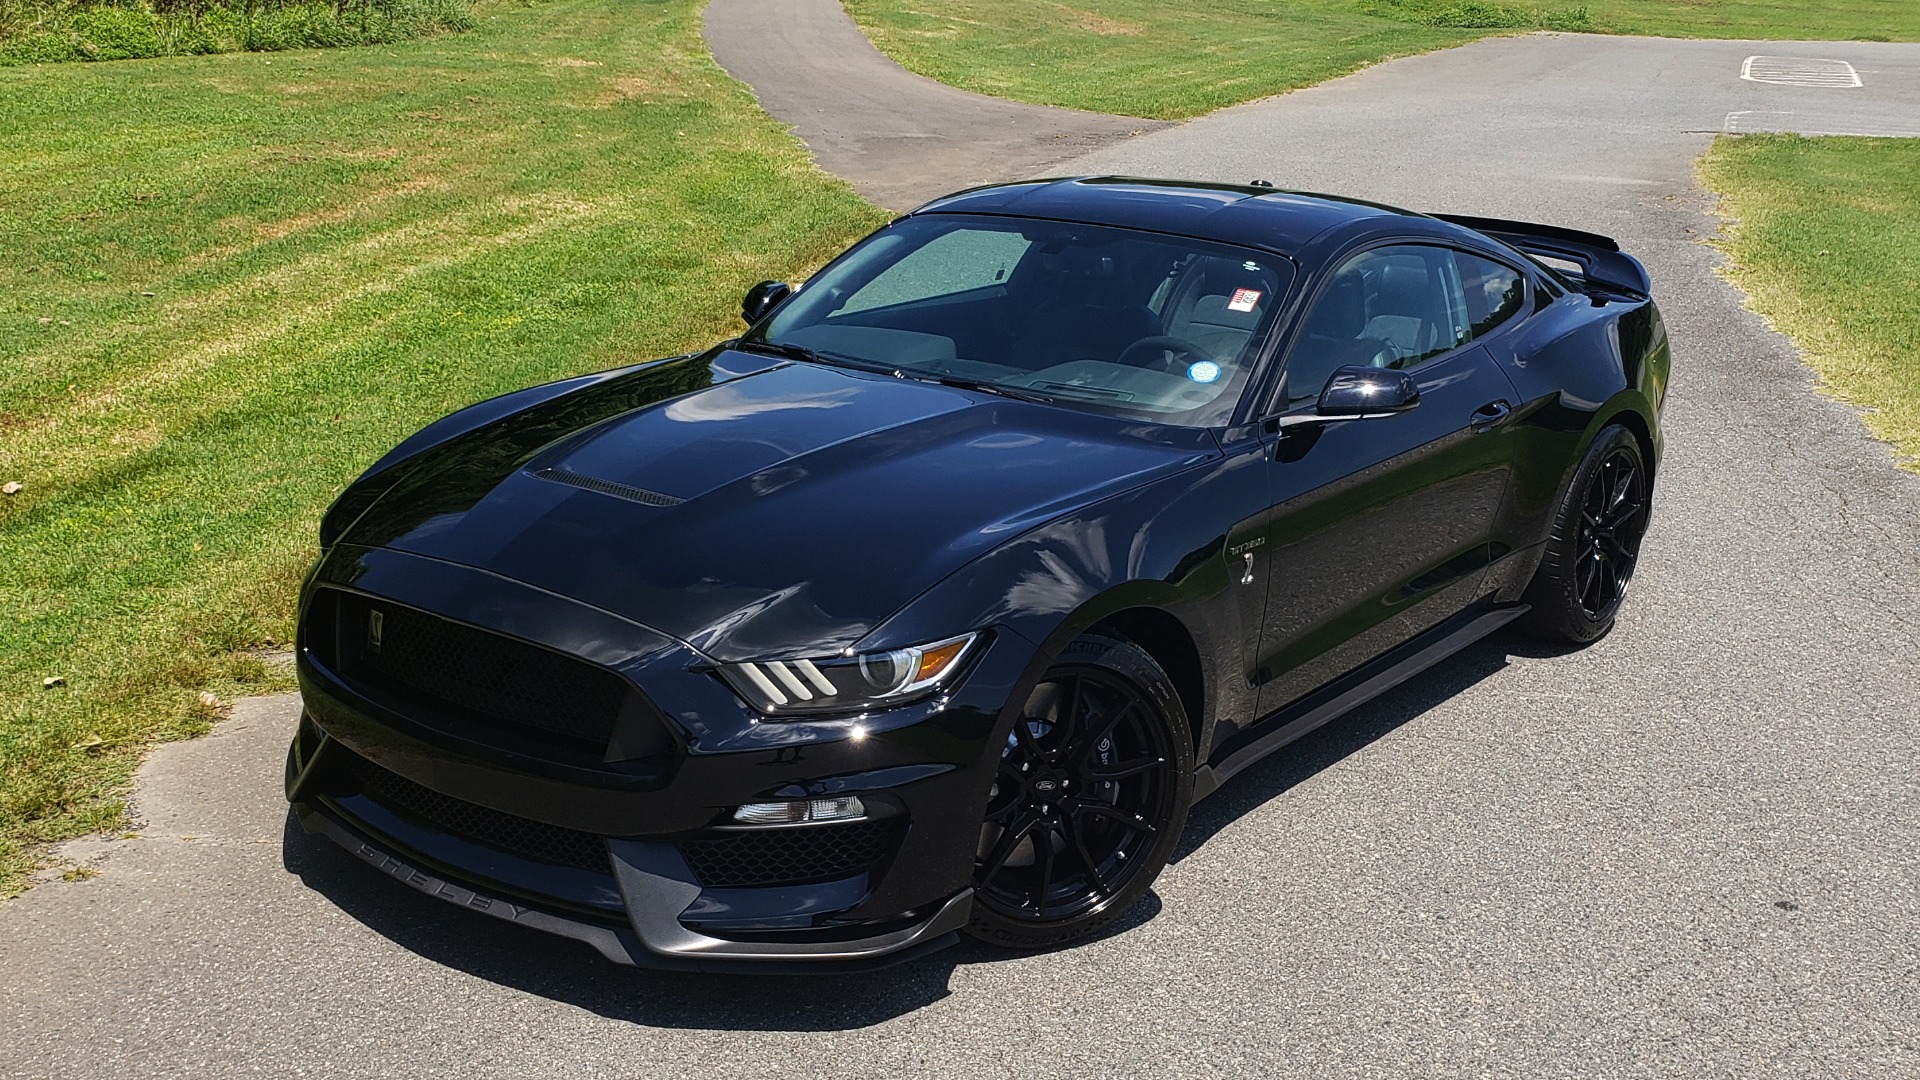 Used 2019 Ford MUSTANG SHELBY GT350 COUPE / TECH PKG / B&O SND / NAV / HNDLNG PKG / REARVIEW for sale Sold at Formula Imports in Charlotte NC 28227 2